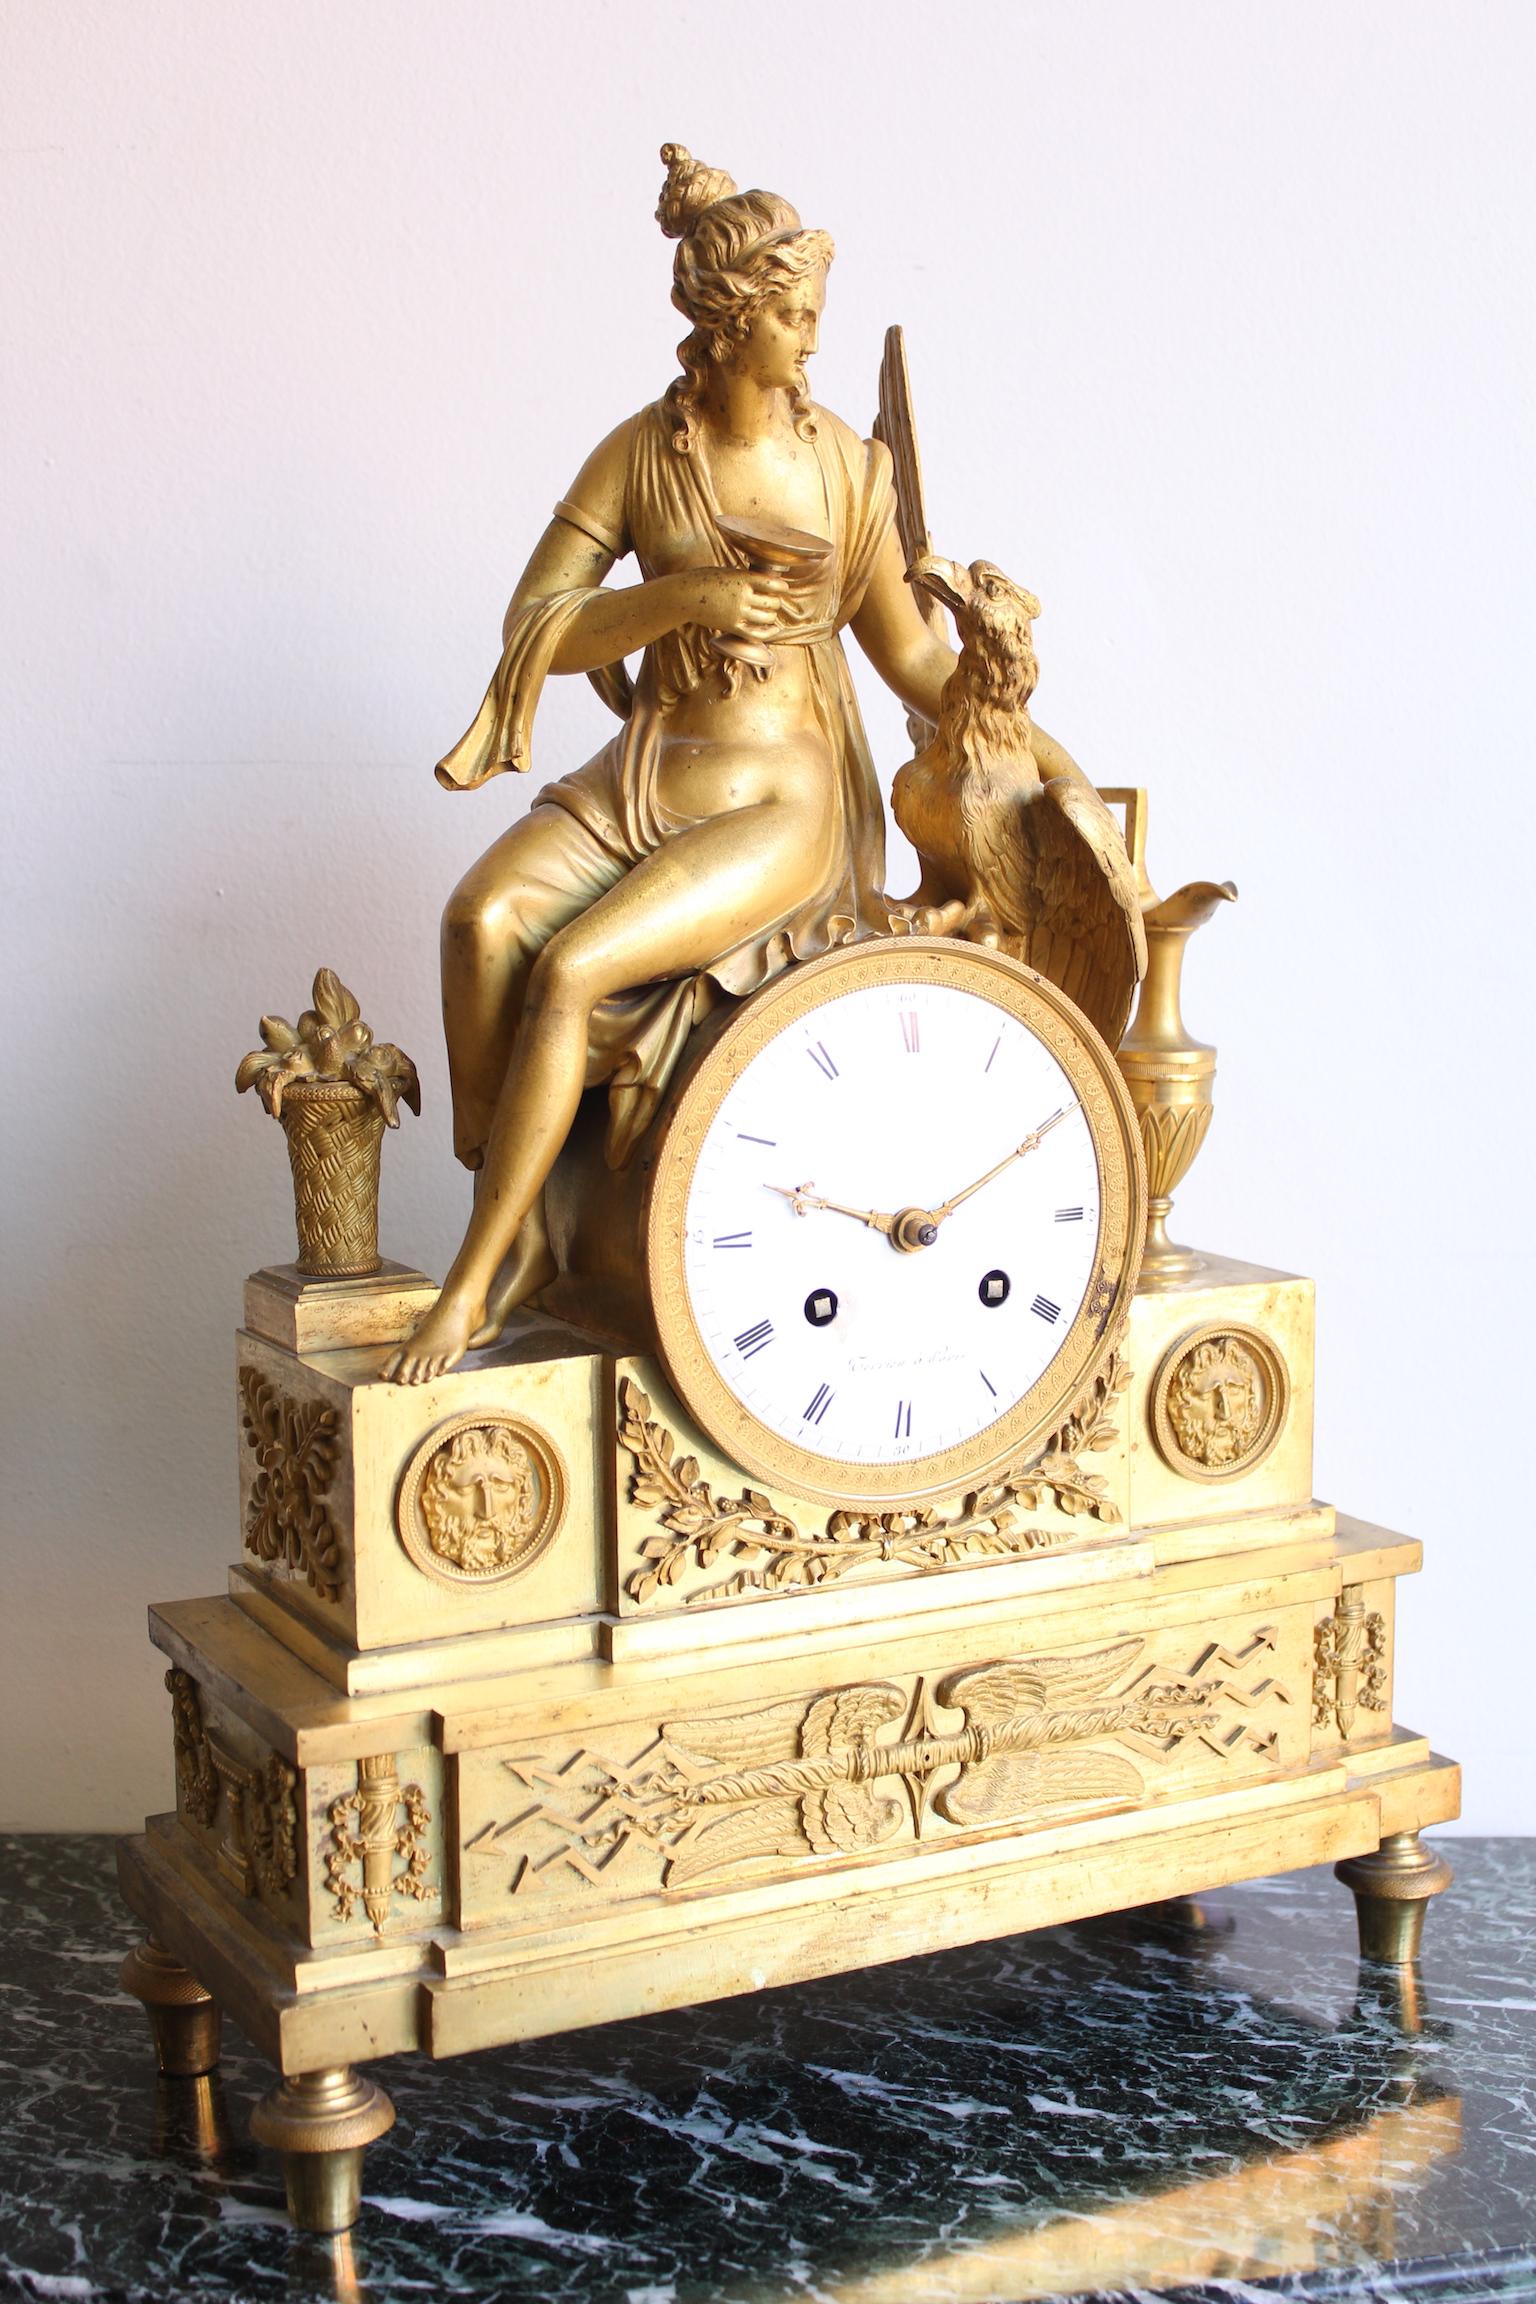 French Empire gilt bronze clock depicting Hebé and the Eagle.
In good condition, to clean.
In working order.
Dimensions: Width 33,5cm, height 47,5cm, depth 14cm.